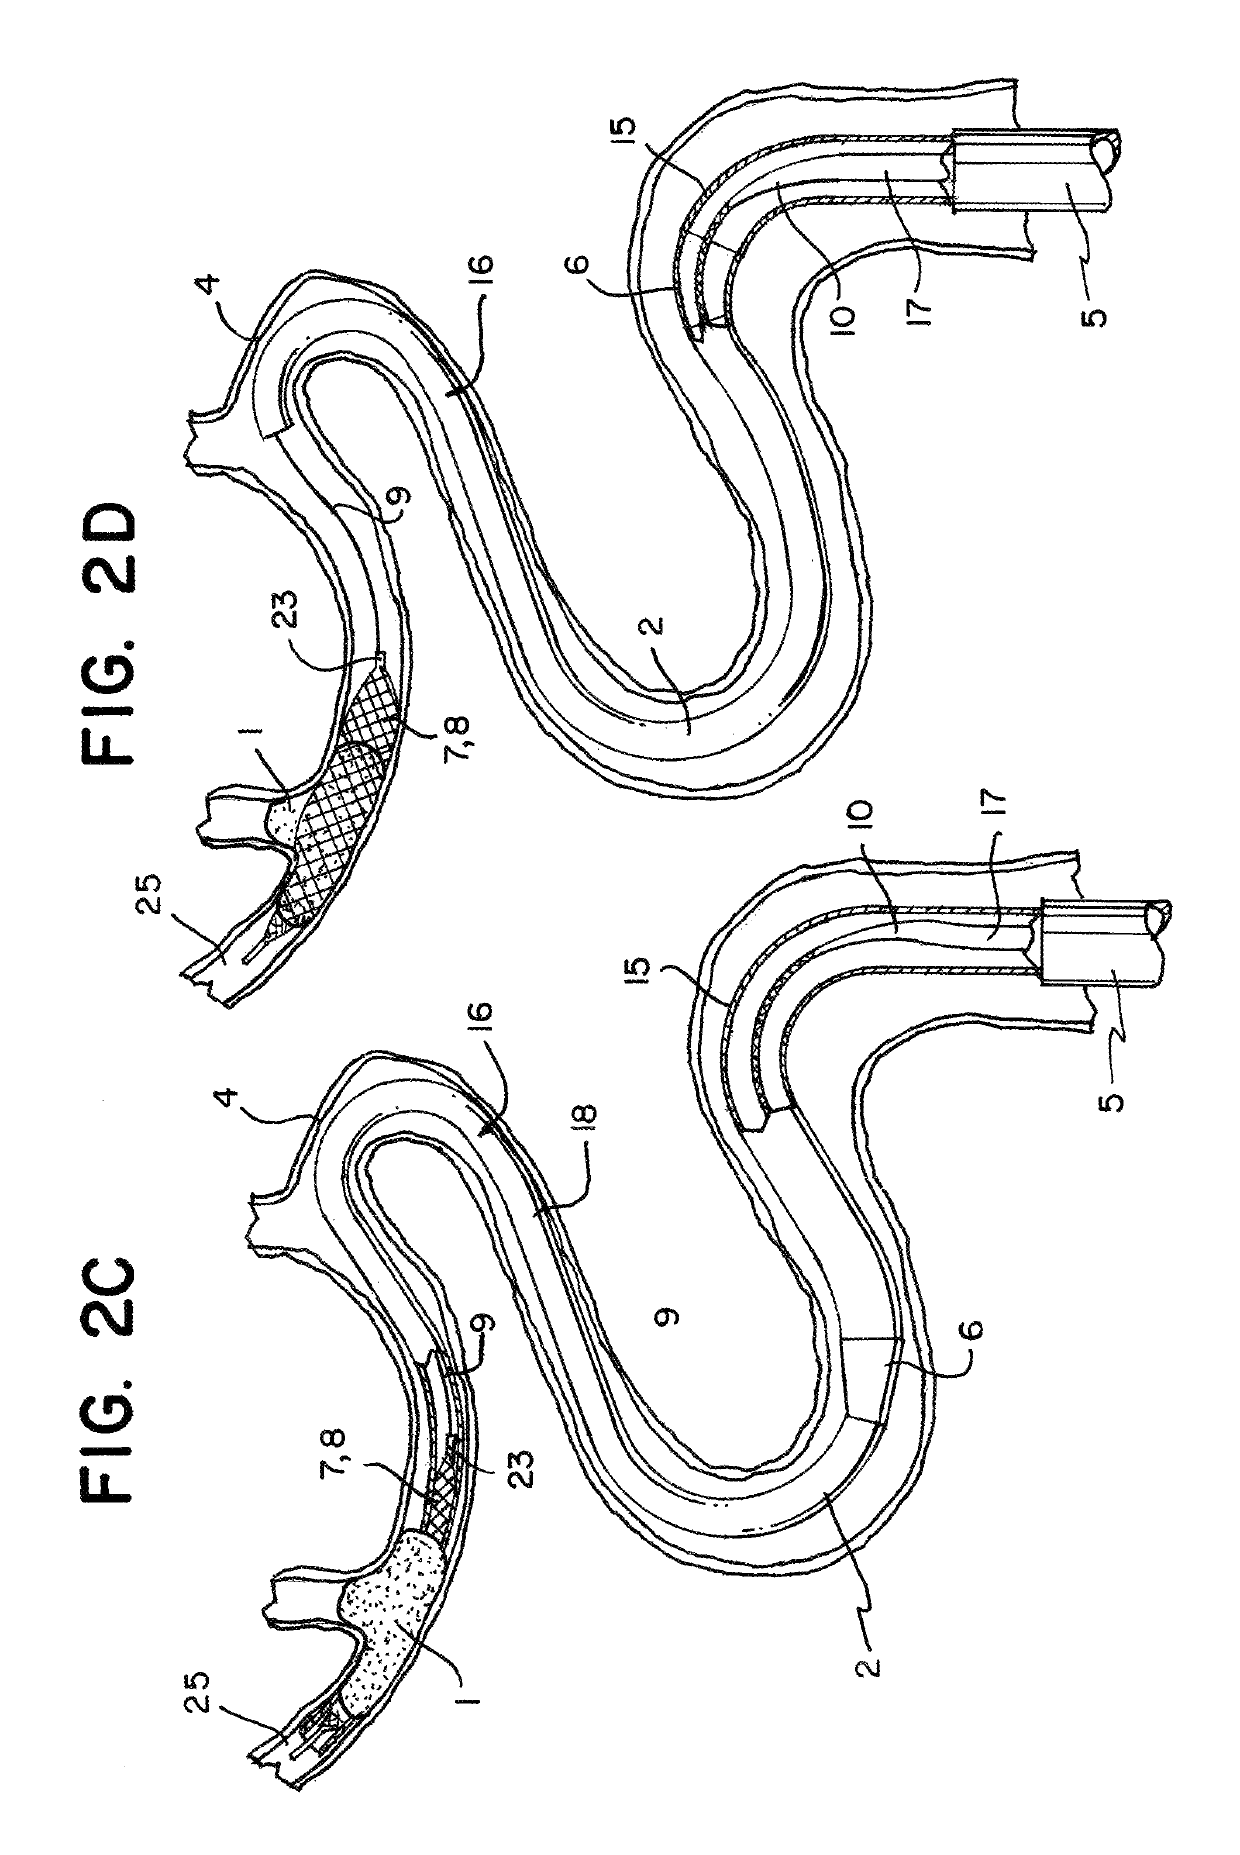 System for removing a clot from a blood vessel